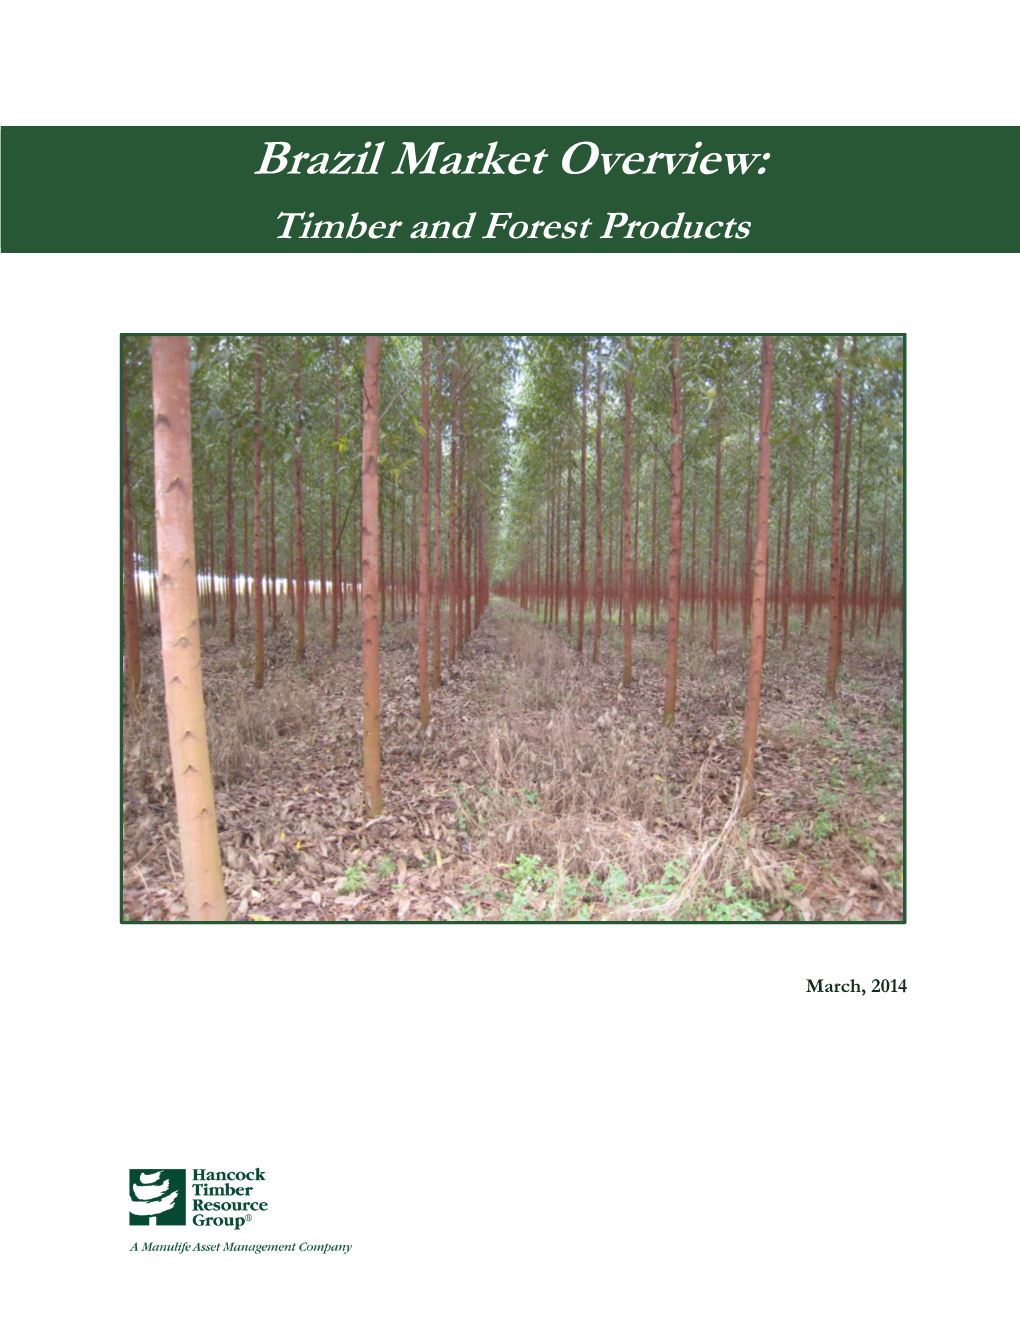 Brazil Market Overview: Timber and Forest Products